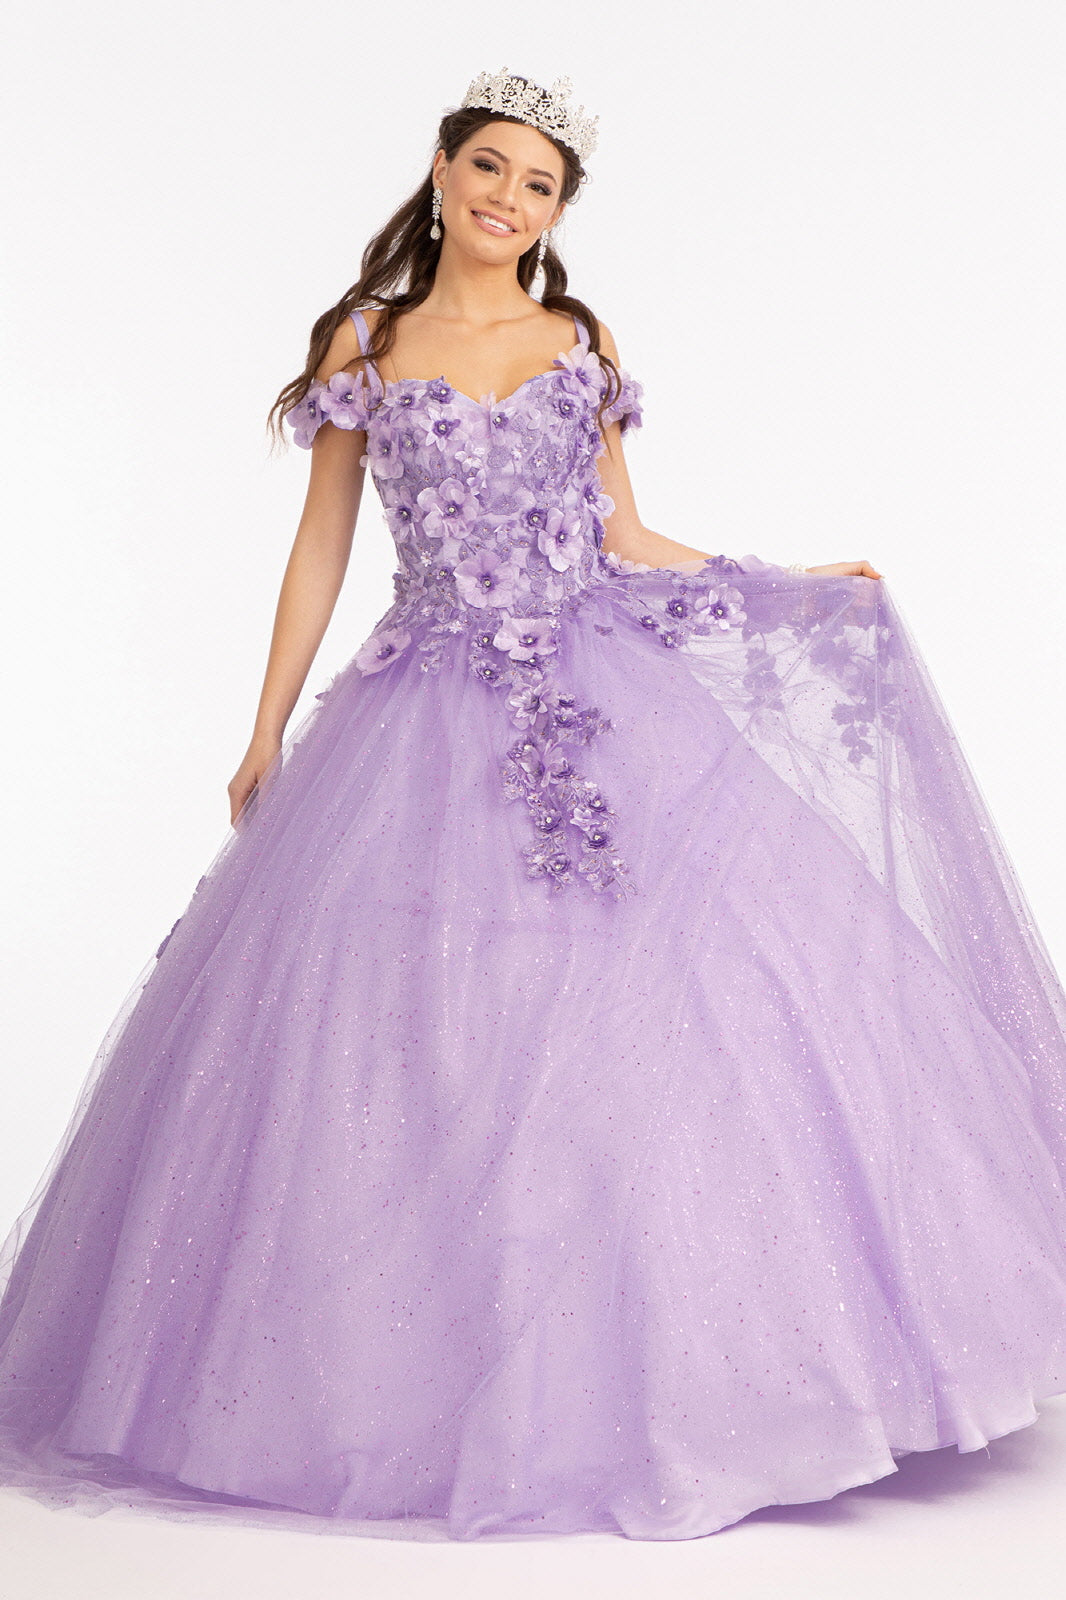 Embroidery and 3D Floral Applique Embellished Sweetheart Quinceanera Dress GLGL1988 Elsy Style QUINCEANERA